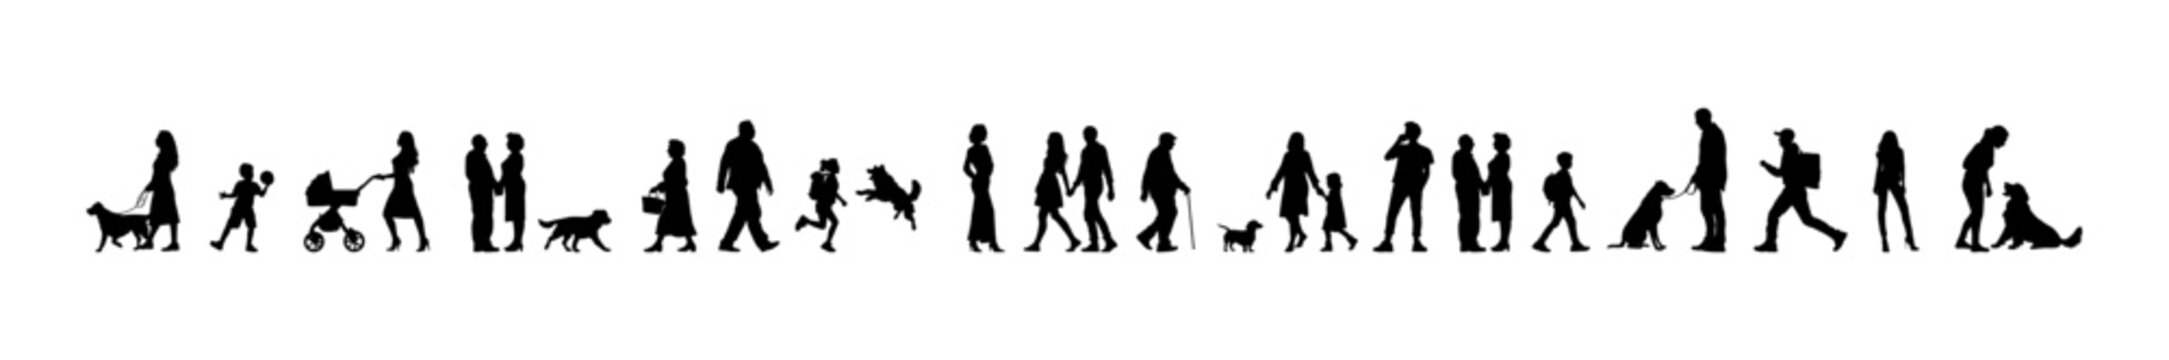 Vector illustration. Silhouettes of dogs of different breeds and sizes. Big set of animals and people. Dog lovers in the park.